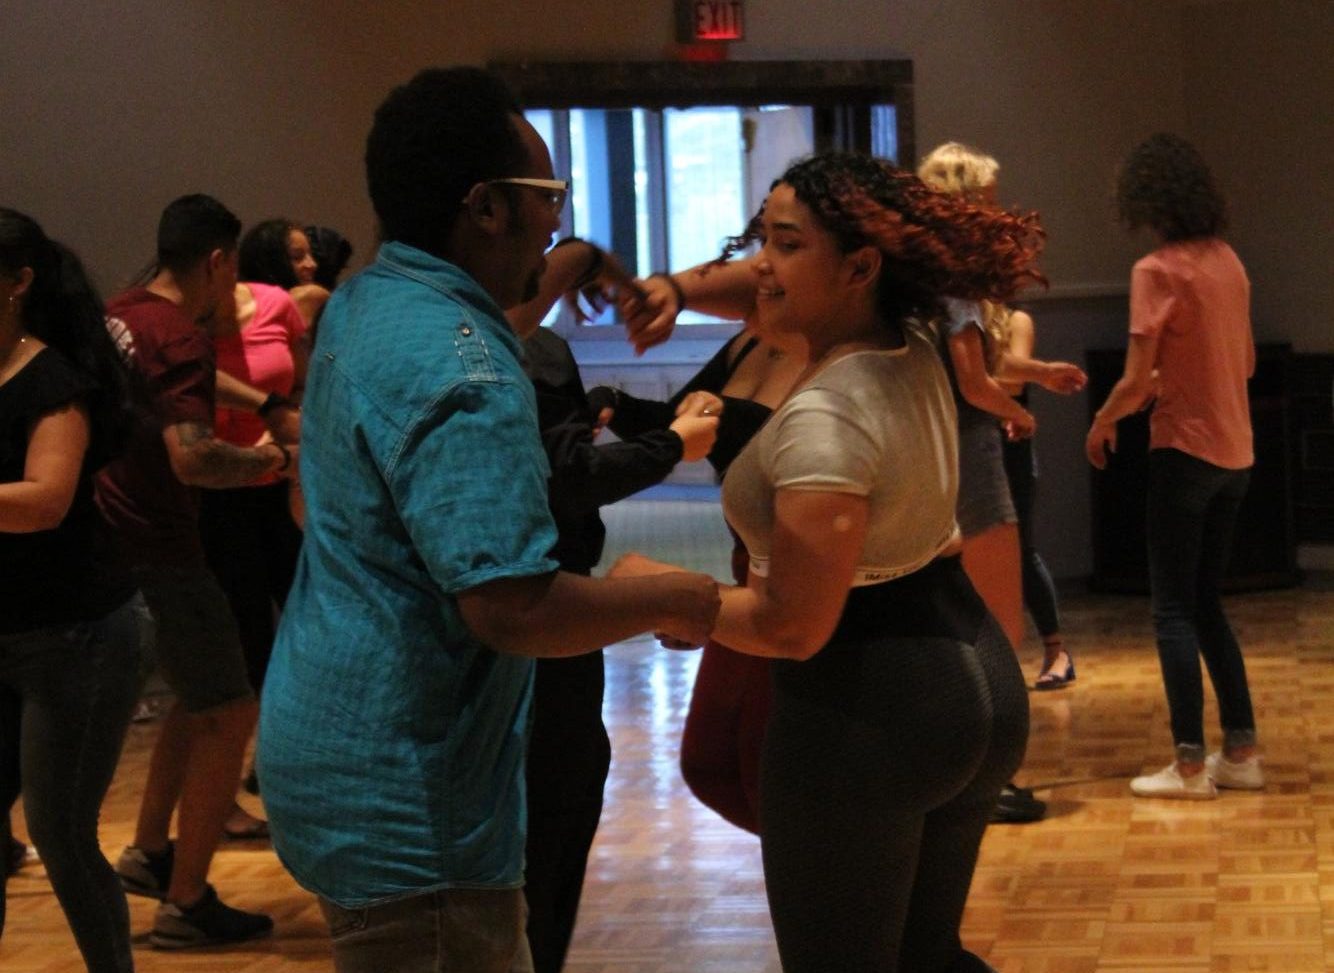 SIU student Janice Vega does a partner dance at the Latin Rhythms Workshop hosted by the Latin American Student Association (LASA) Sept. 22, 2023 at the Student Center Ballrooms in Carbondale, Illinois.